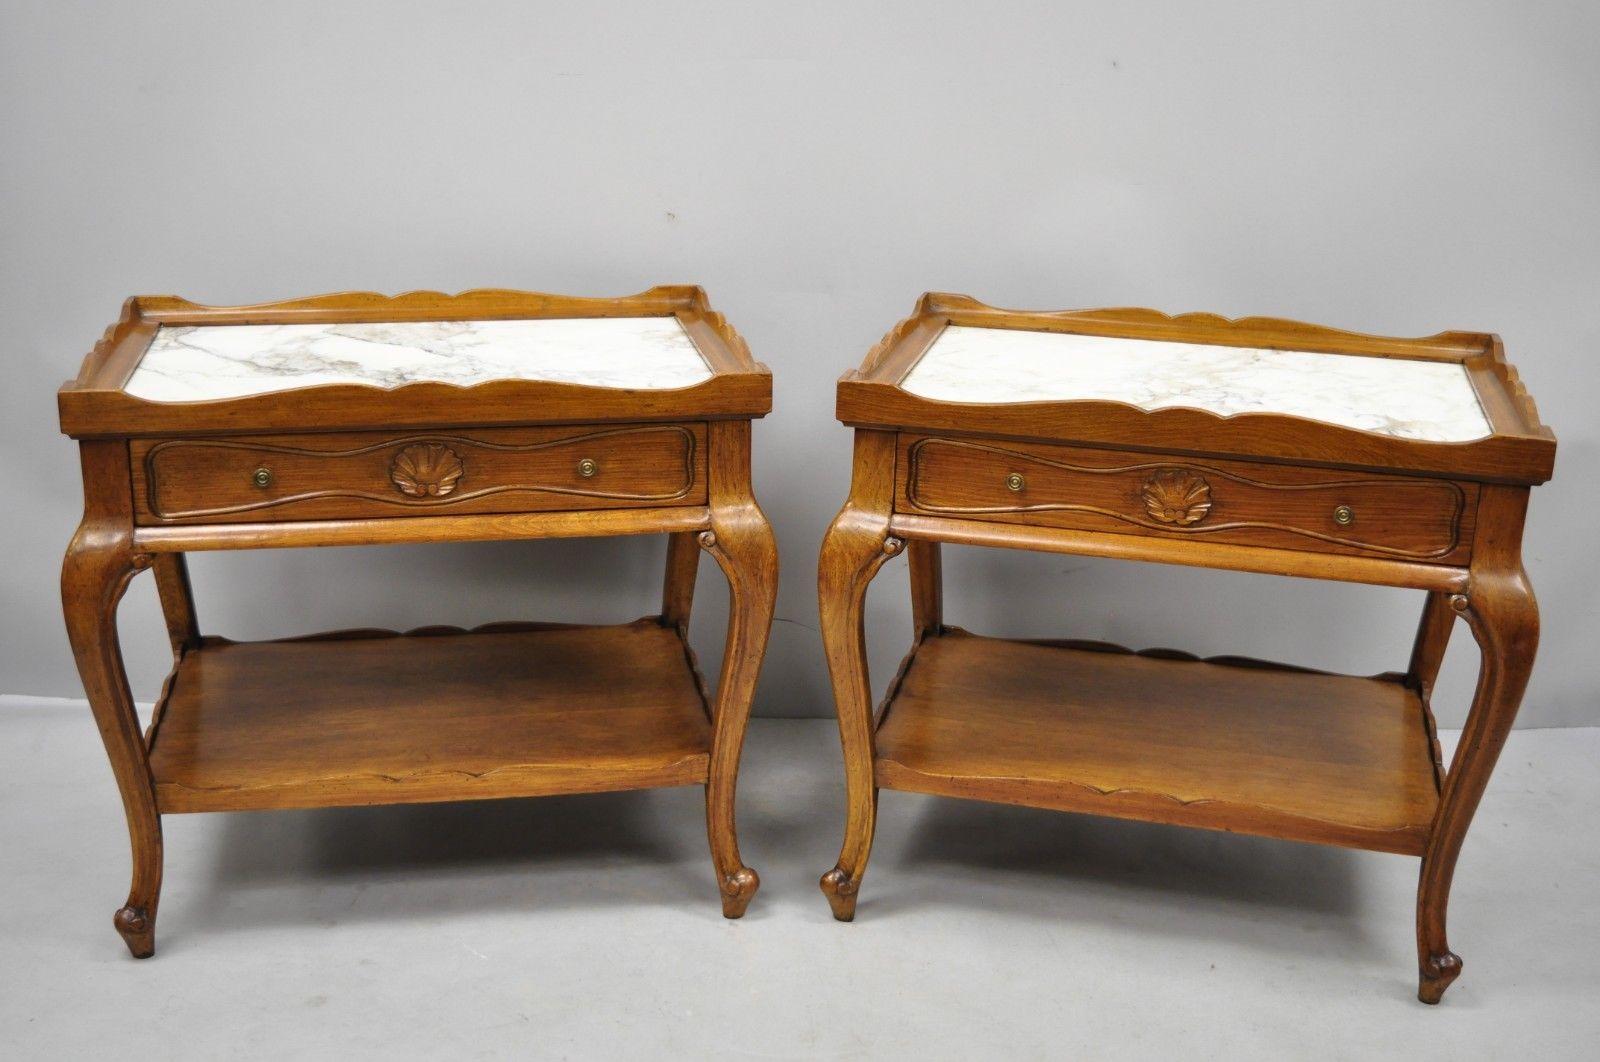 Pair of French Provincial Louis XV style marble top shell carved end tables Danby. Items feature carved shells on all sides, inset marble top, lower shelf, beautiful wood grain, original Danby stamp, 1 dovetailed drawer, cabriole legs, quality